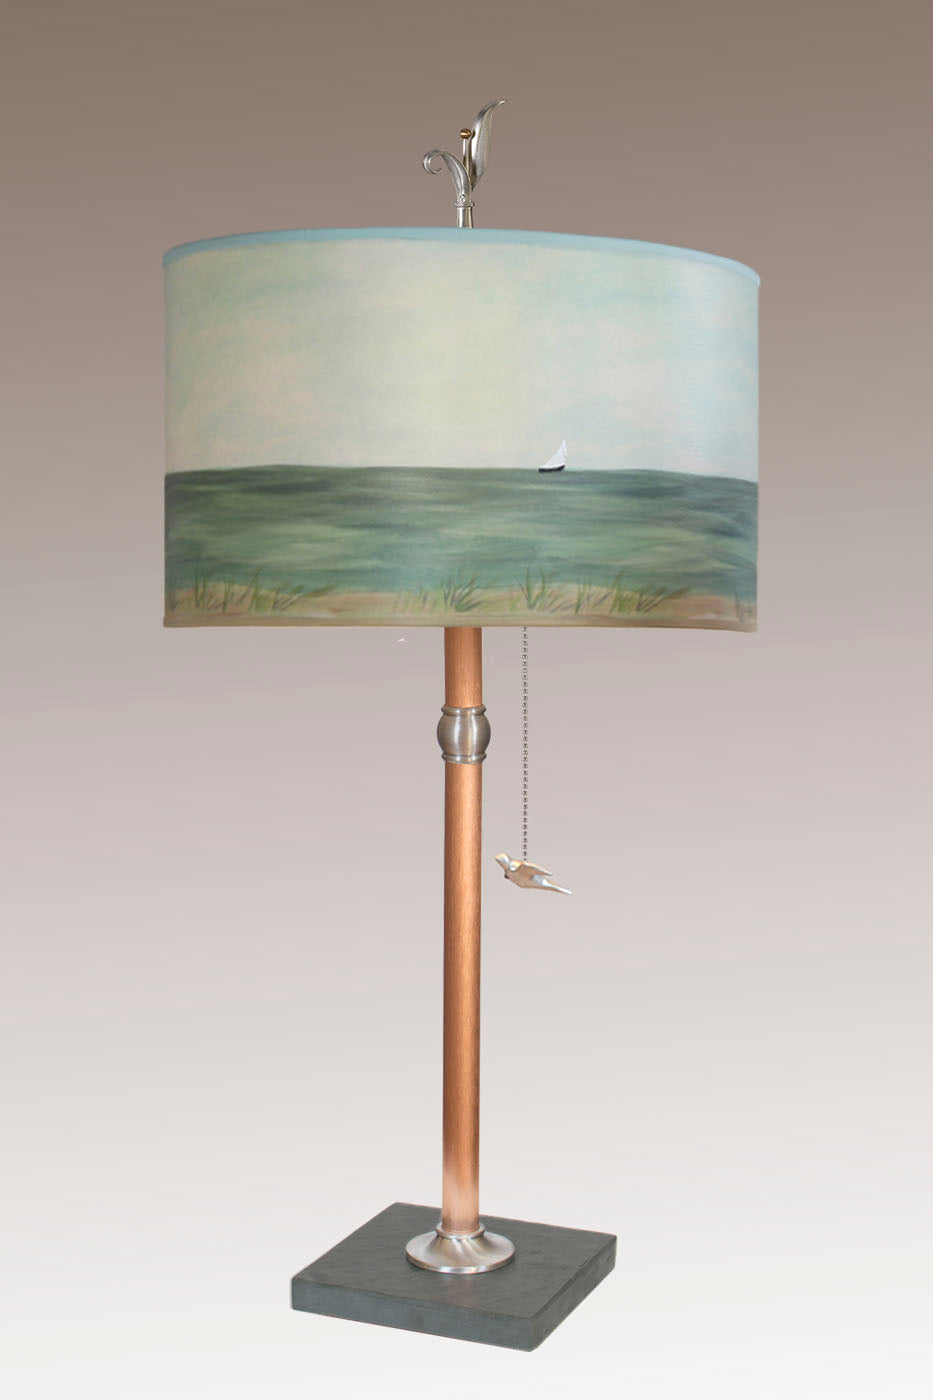 Janna Ugone & Co Table Lamps Copper Table Lamp with Large Drum Shade in Shore